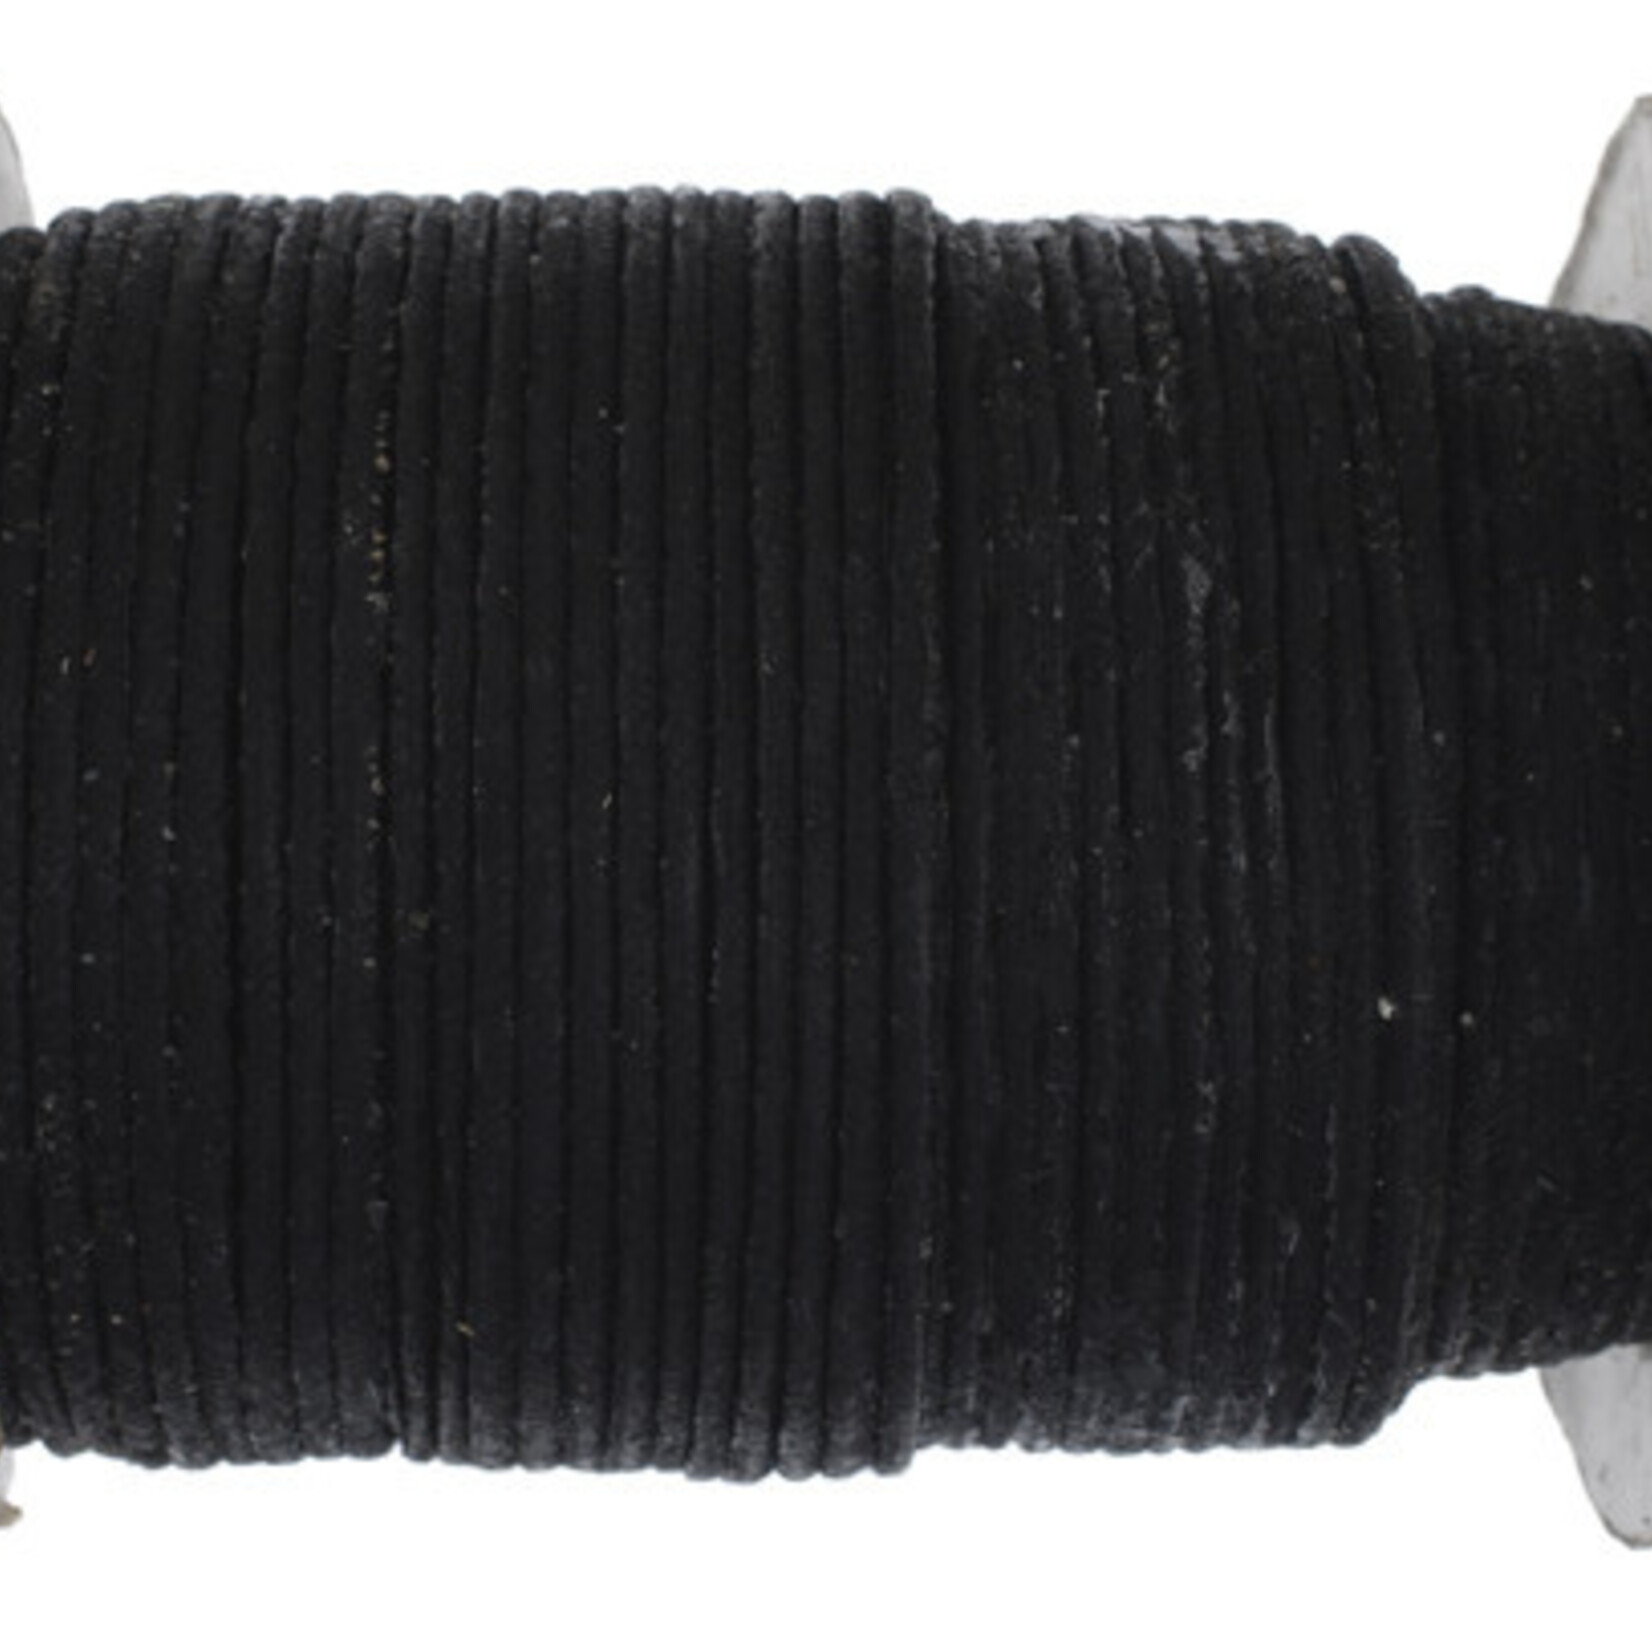 Cord Waxed Black 1.8mm Round